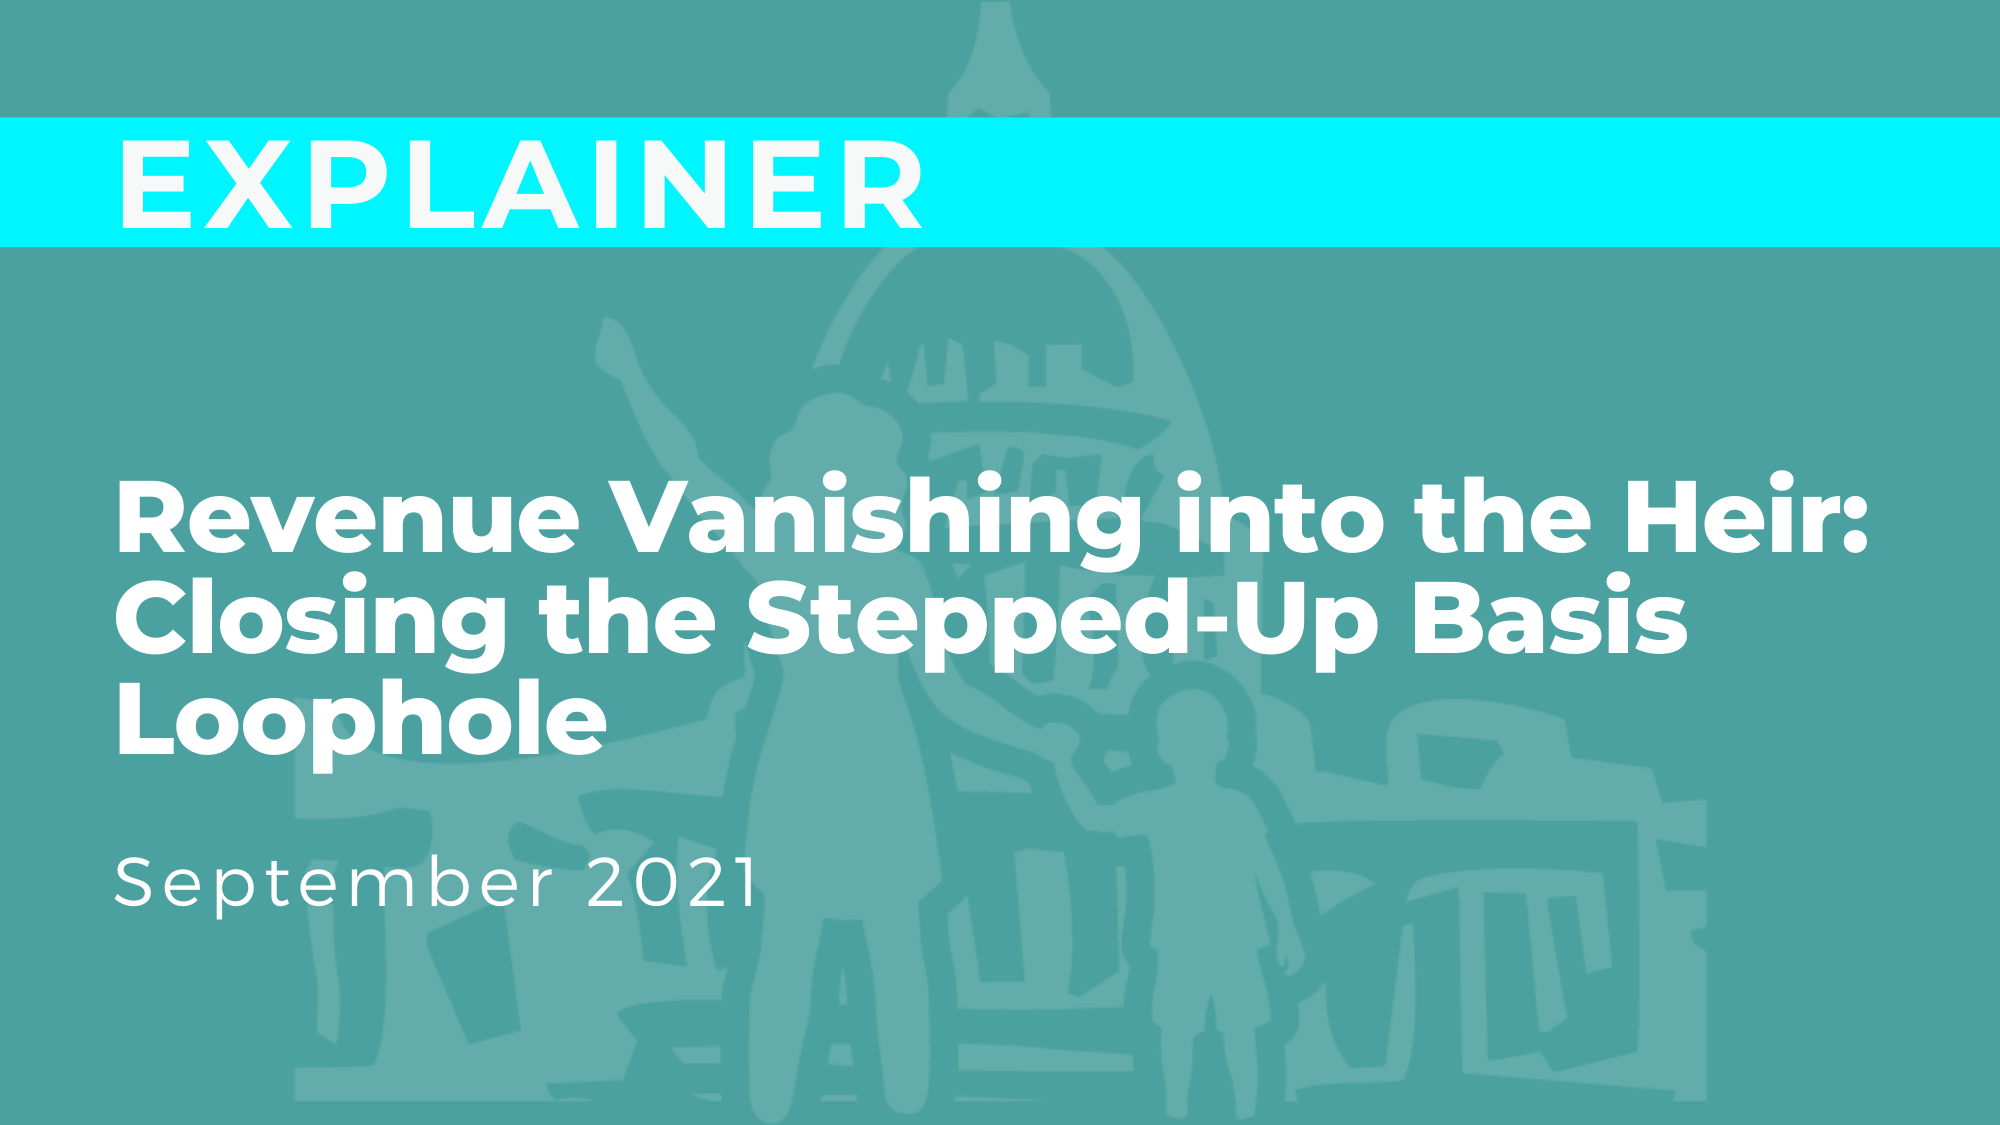 Revenue Vanishing Into the Heir: Closing the Stepped-Up Basis Loophole